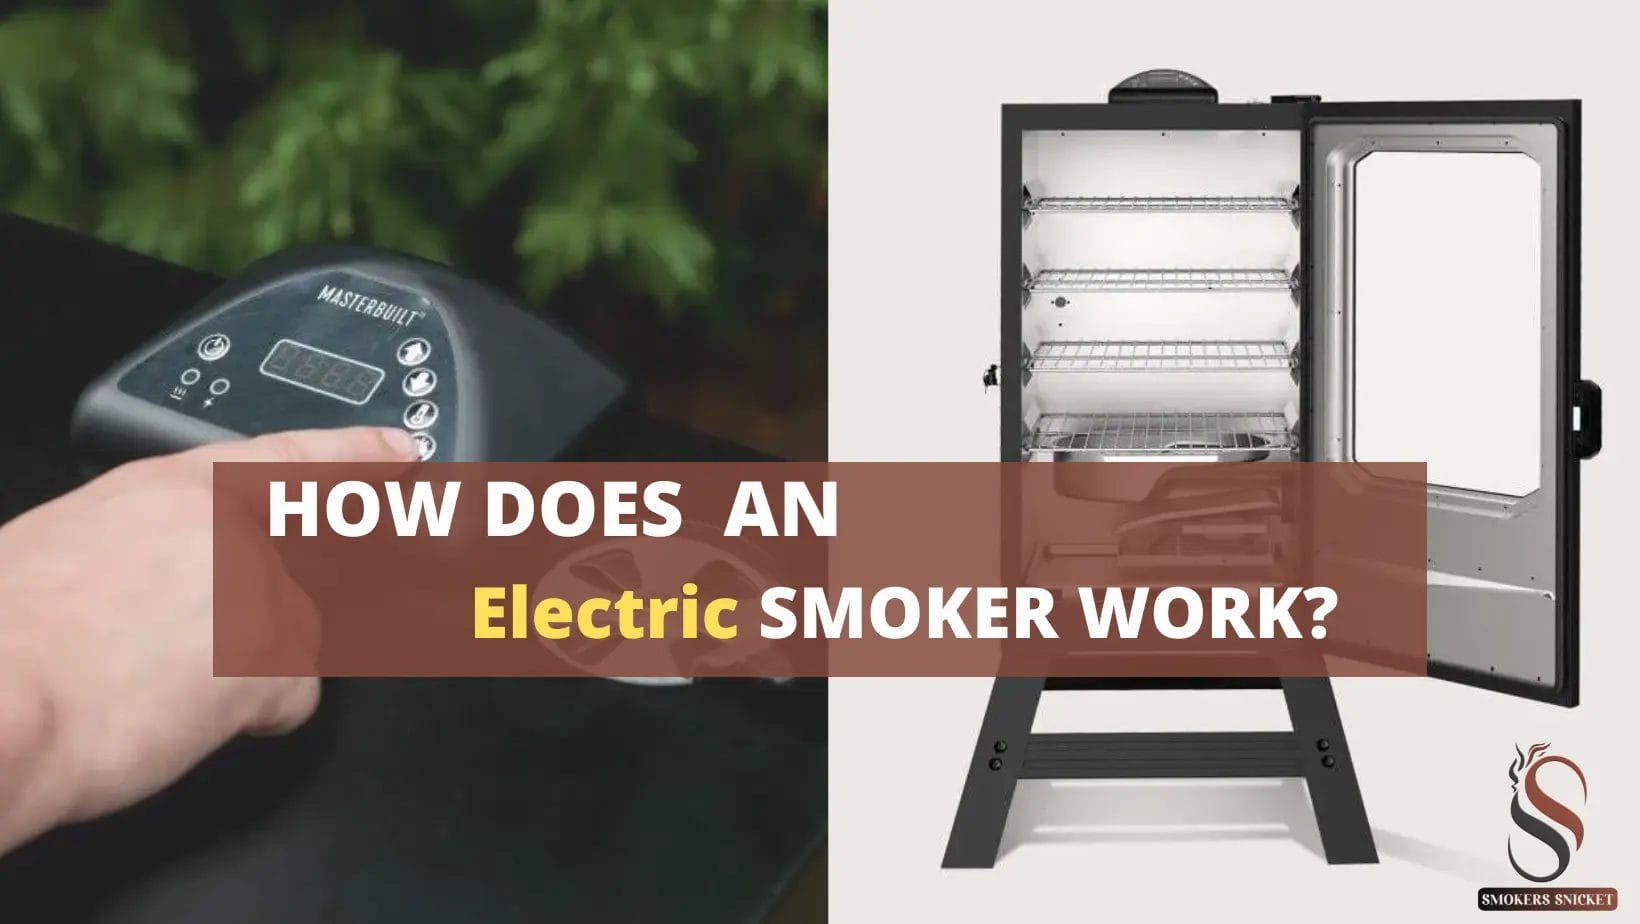 How does an Electric Smoker work